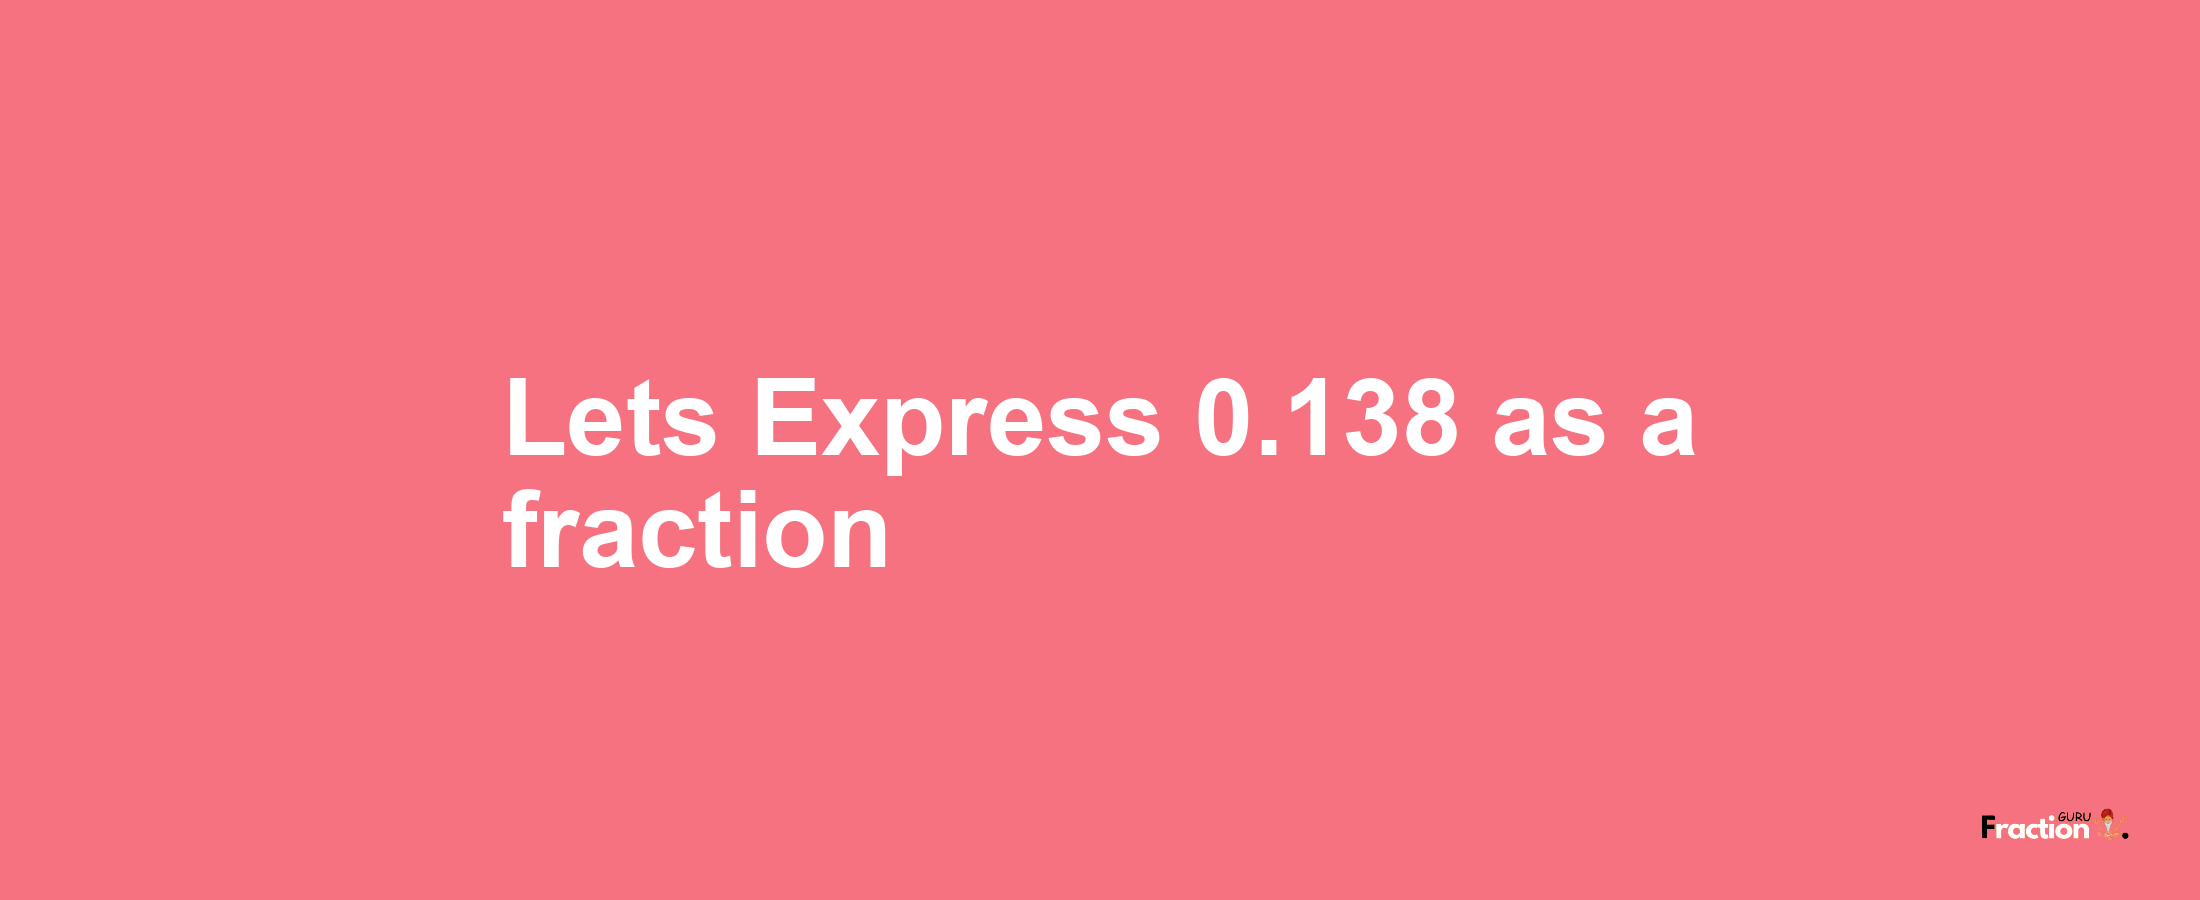 Lets Express 0.138 as afraction